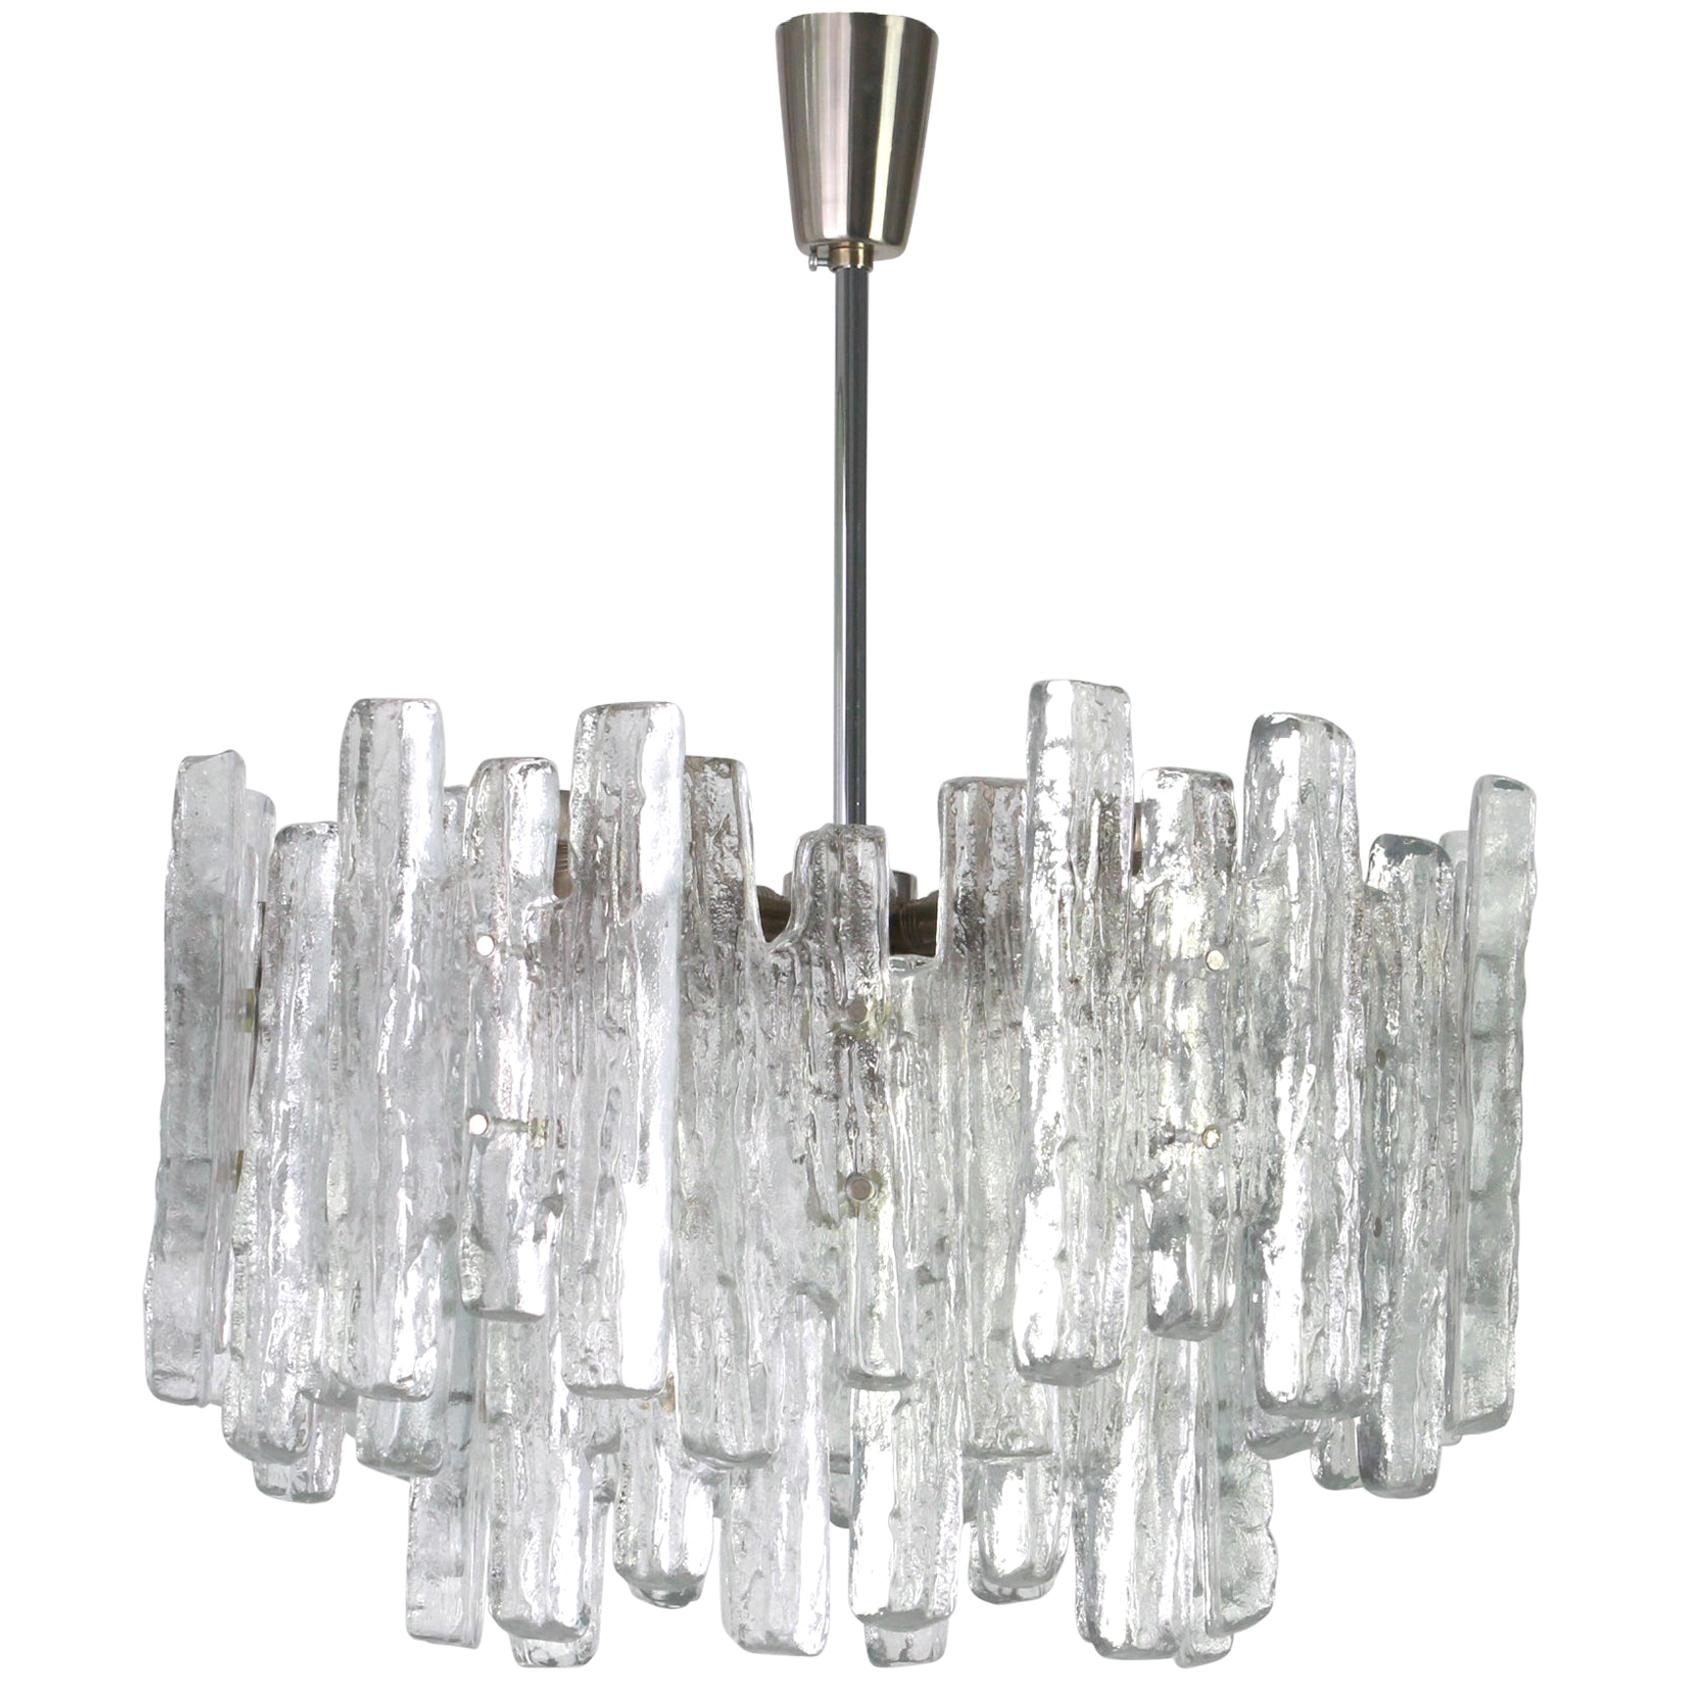 1 of 2 Large Rare Murano Ice Glass Chandelier by Kalmar, Austria, 1960s For Sale